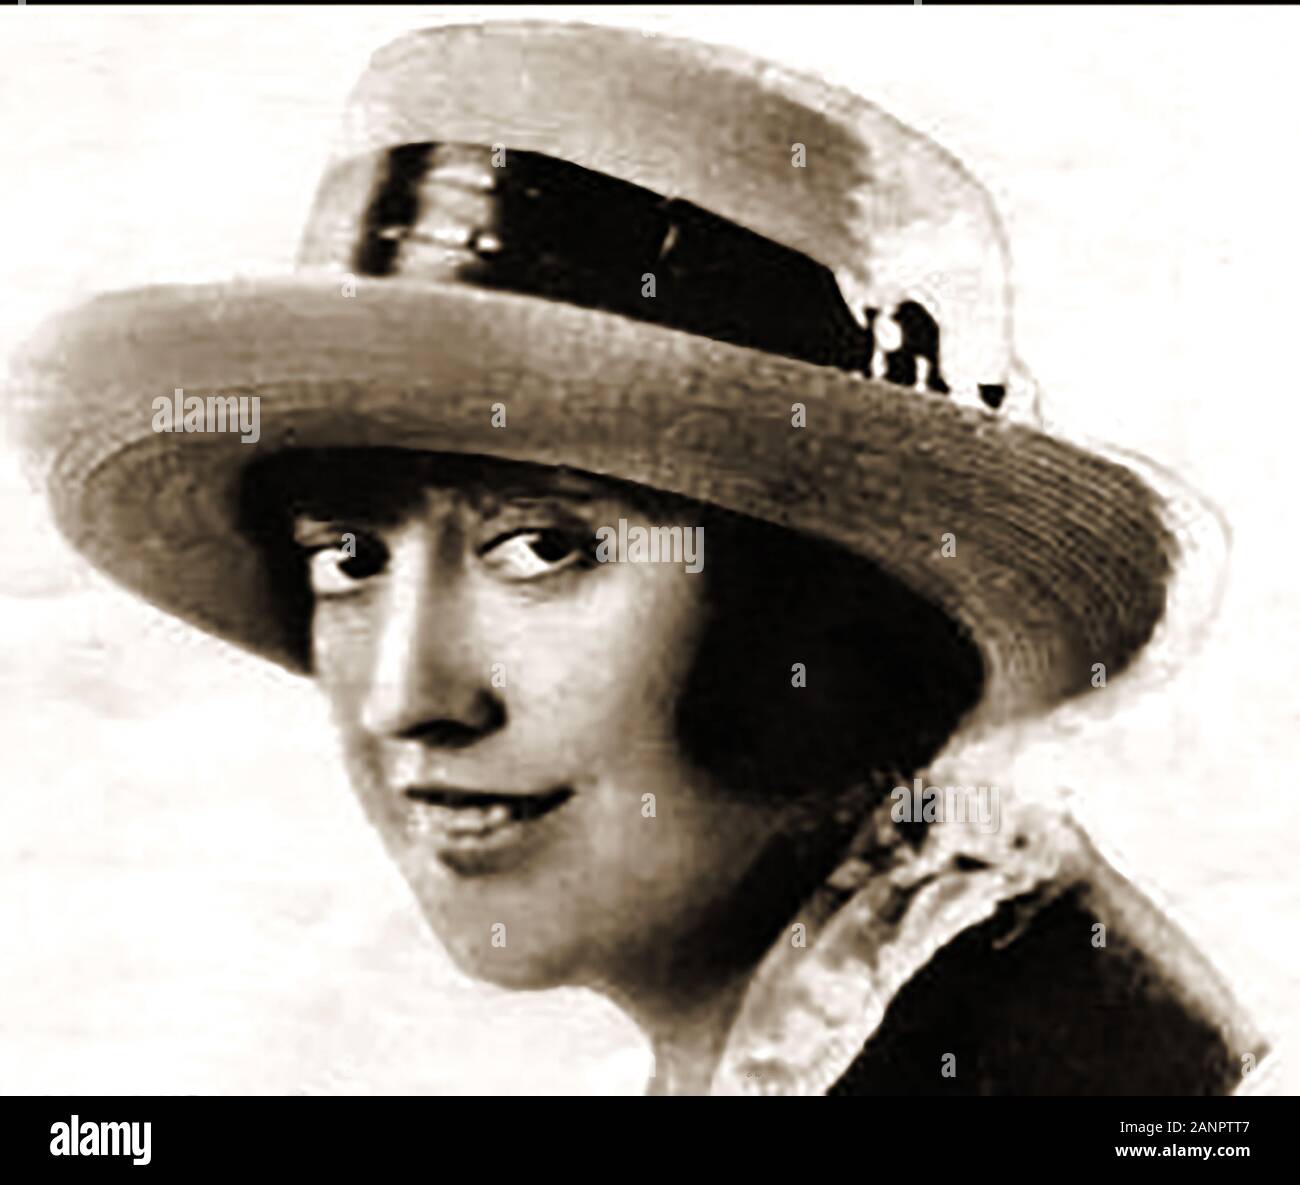 The 1926 murder of Hollywood film director William Desmond - A  press portrait  of Mabel Normand a popular comedic actress and frequent co-star of Charlie Chaplin. She was an alleged cocaine addict  and lover of Desmond who it said planned to bring charges against her supplier. A contract killing was suspected. Tayler,  (born William Cunningham Deane-Tanner  1872 –  1922)  movie director and actor murdered in his home 1922, causing one of Hollywood's greatest scandals. He was  an Anglo-Irish-American director and actor during the silent film era. Stock Photo